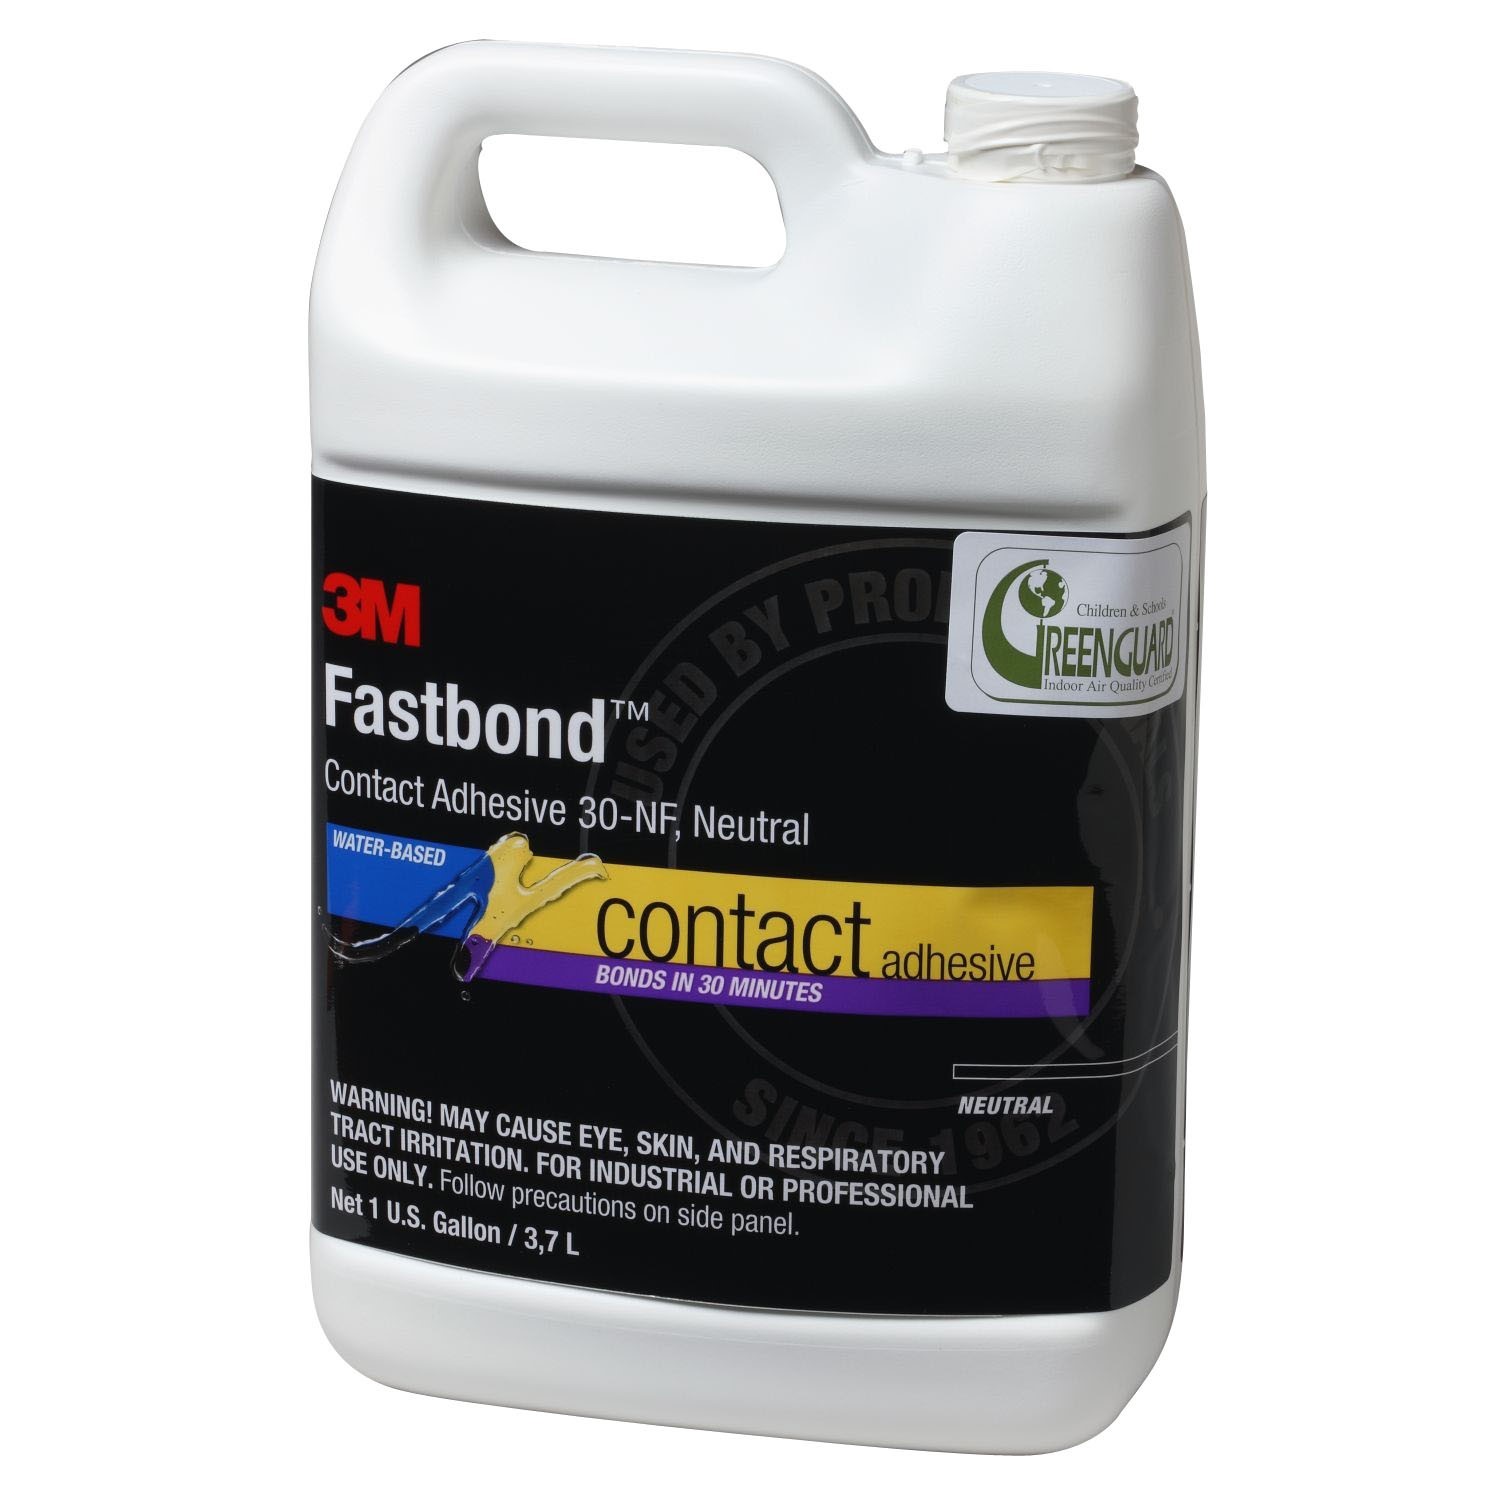 Buy the 3M FB30-GL FastBond Contact Adhesive, 30NF Neutral ~ Gallon